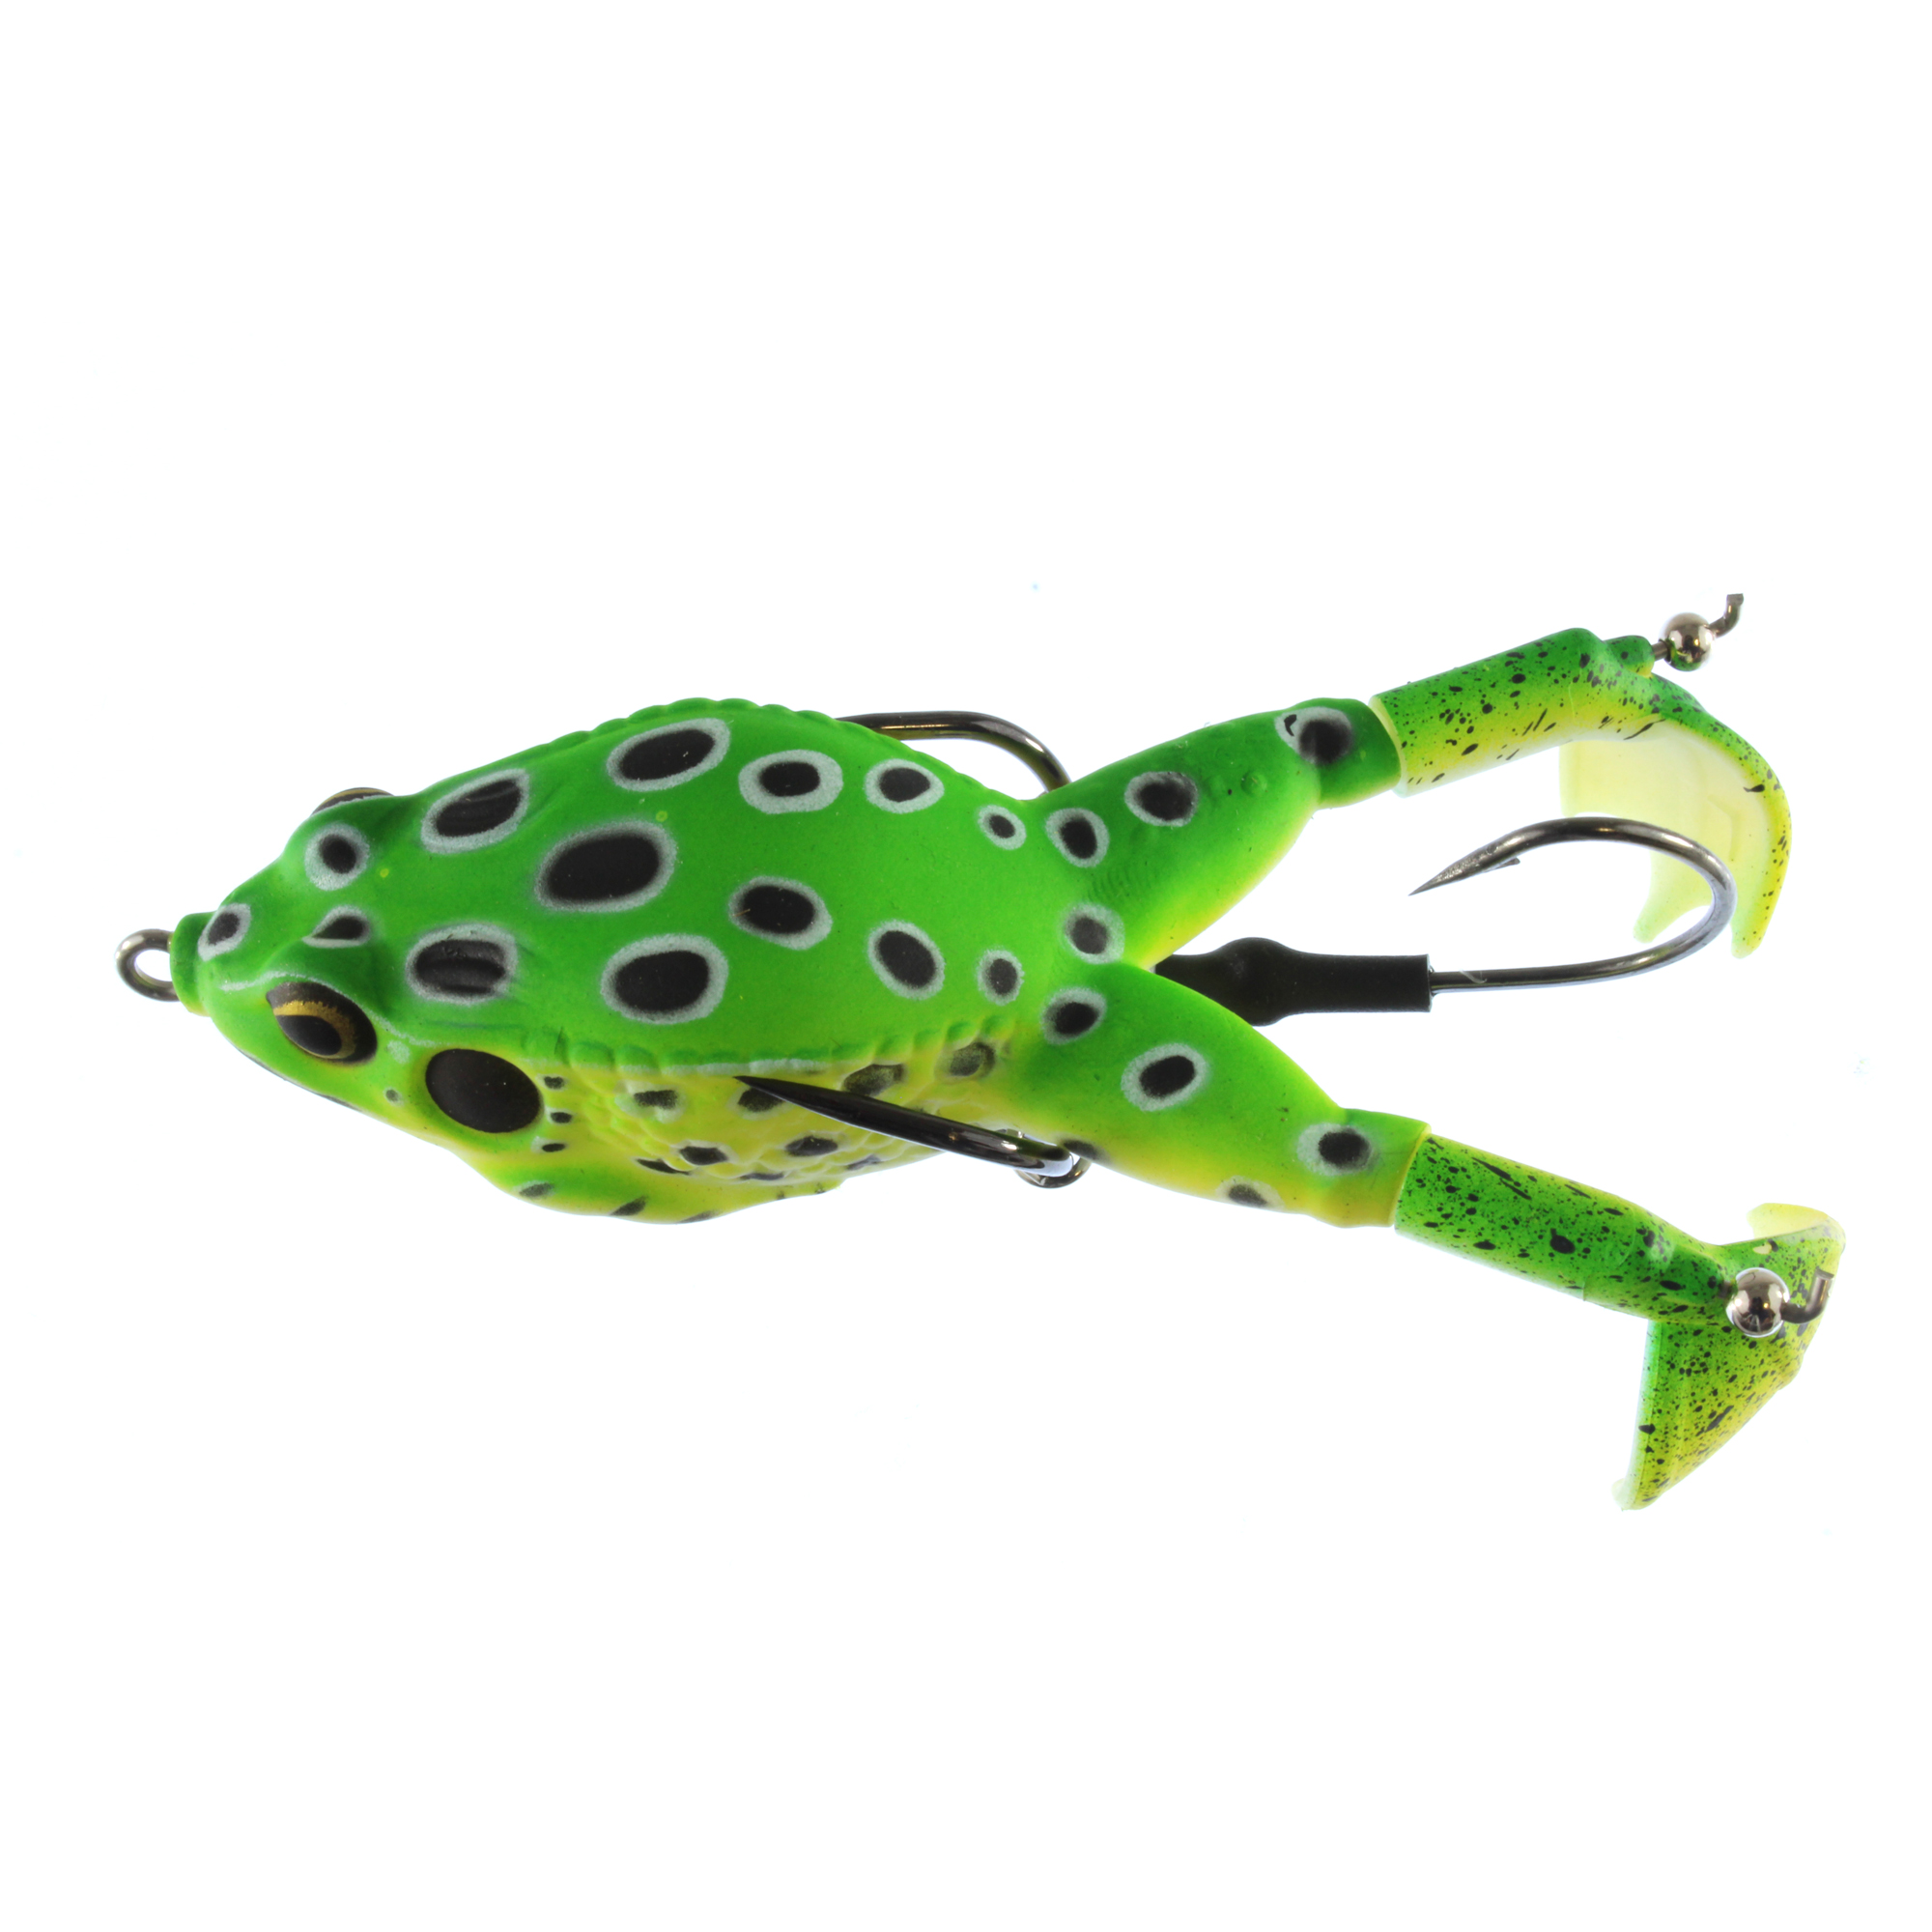 Lunkerhunt - Lunker Frog, Croaker – Fishing Lure with Realistic